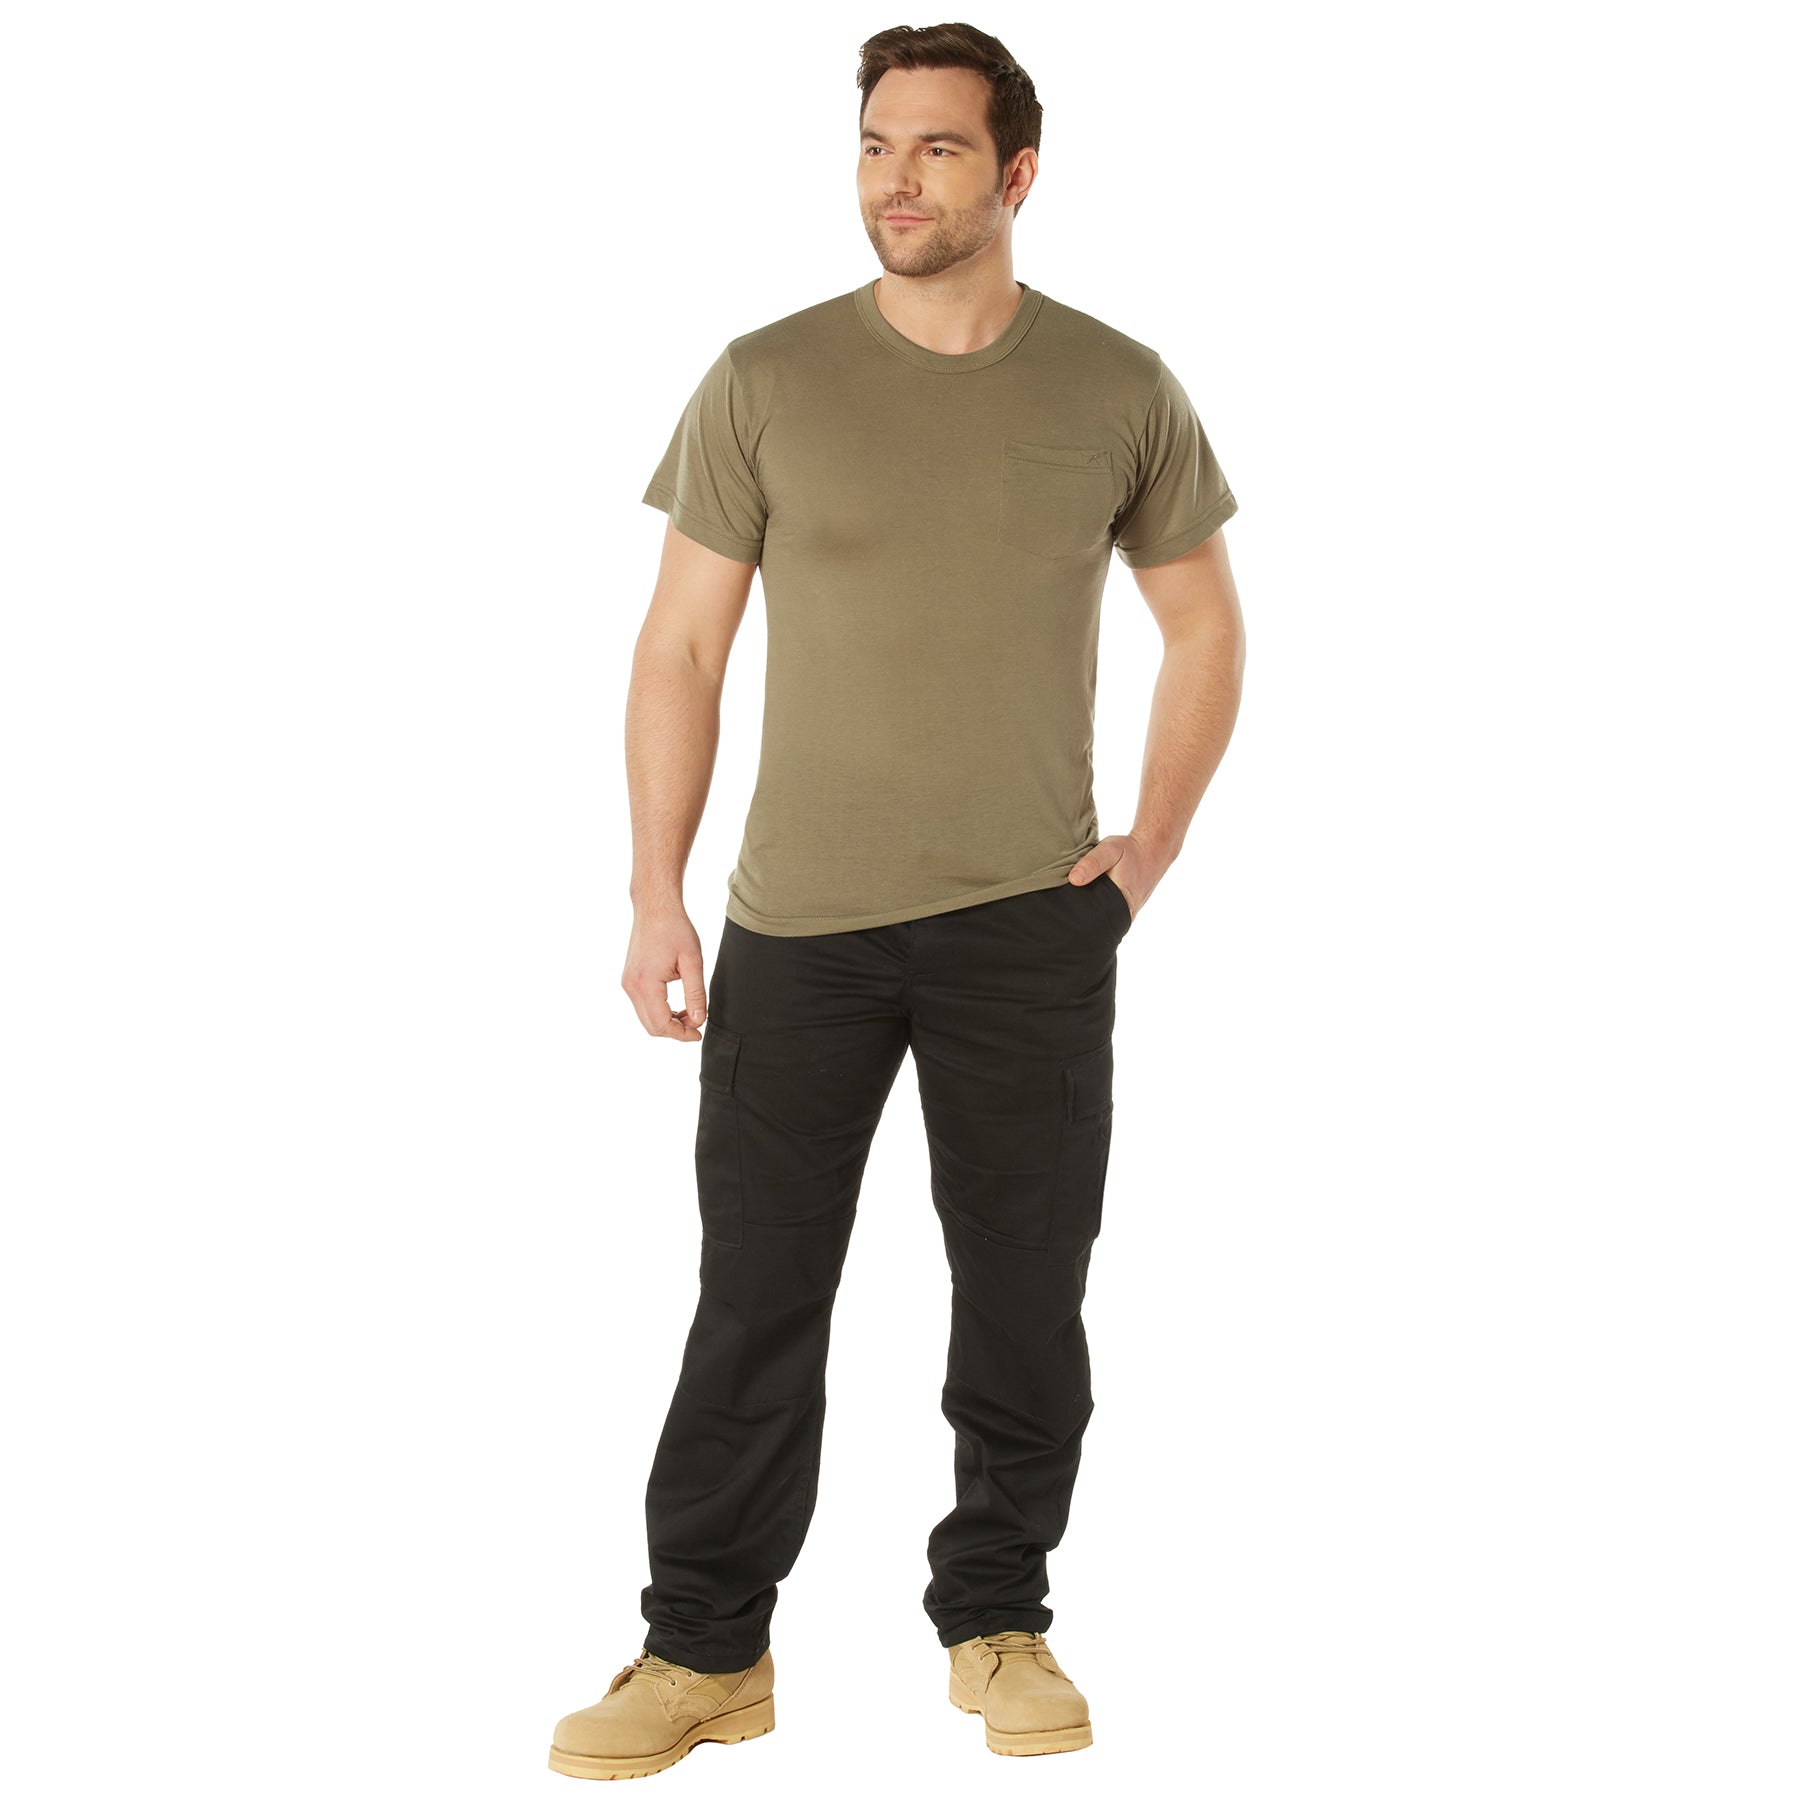 [AR 670-1] Poly Moisture Wicking Pocket T-Shirts Coyote Brown AR 670-1